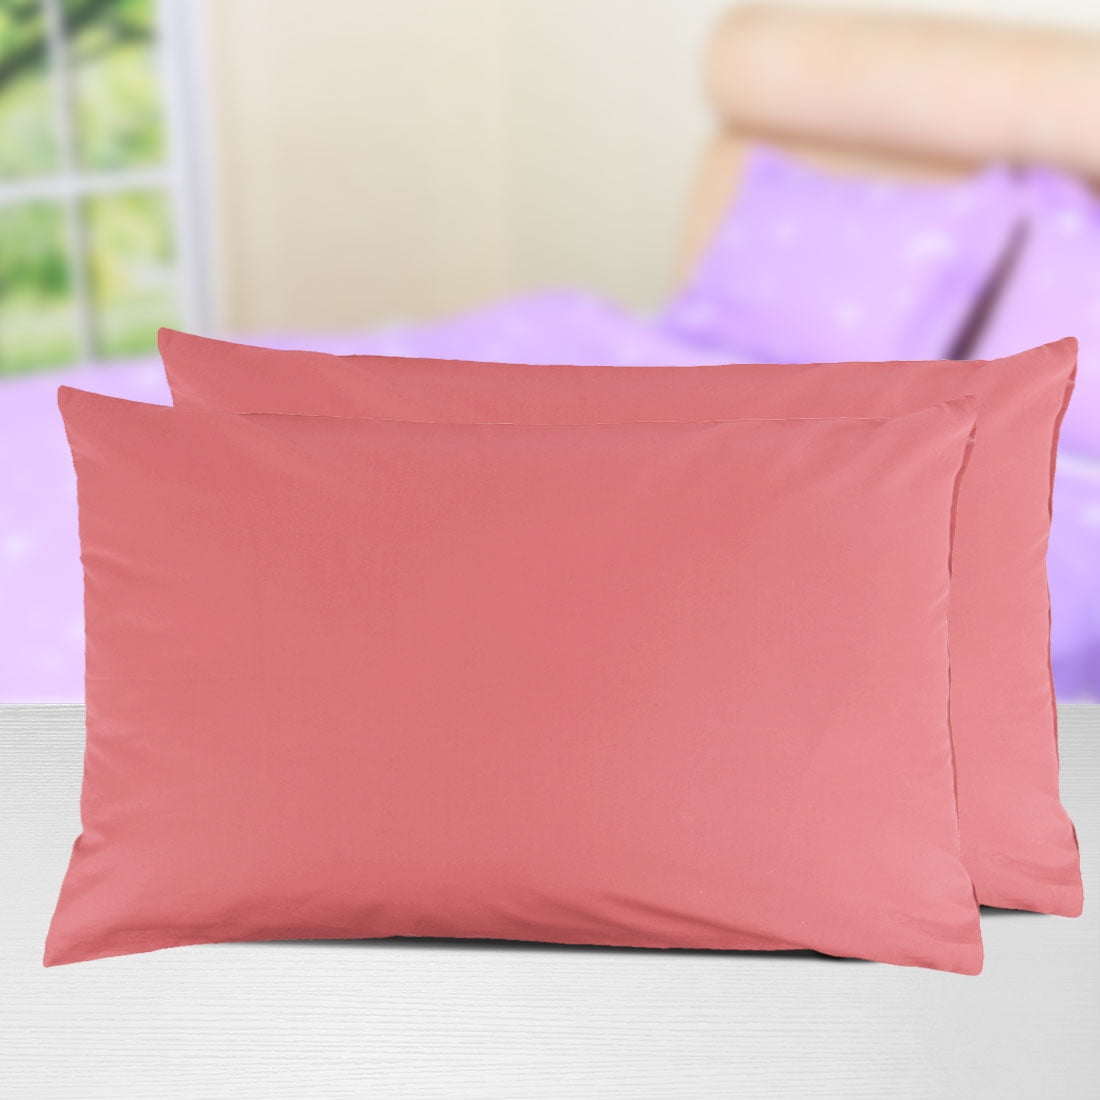 standard size for happy bedroom bright colorful great gift adult or child PILLOW CASE